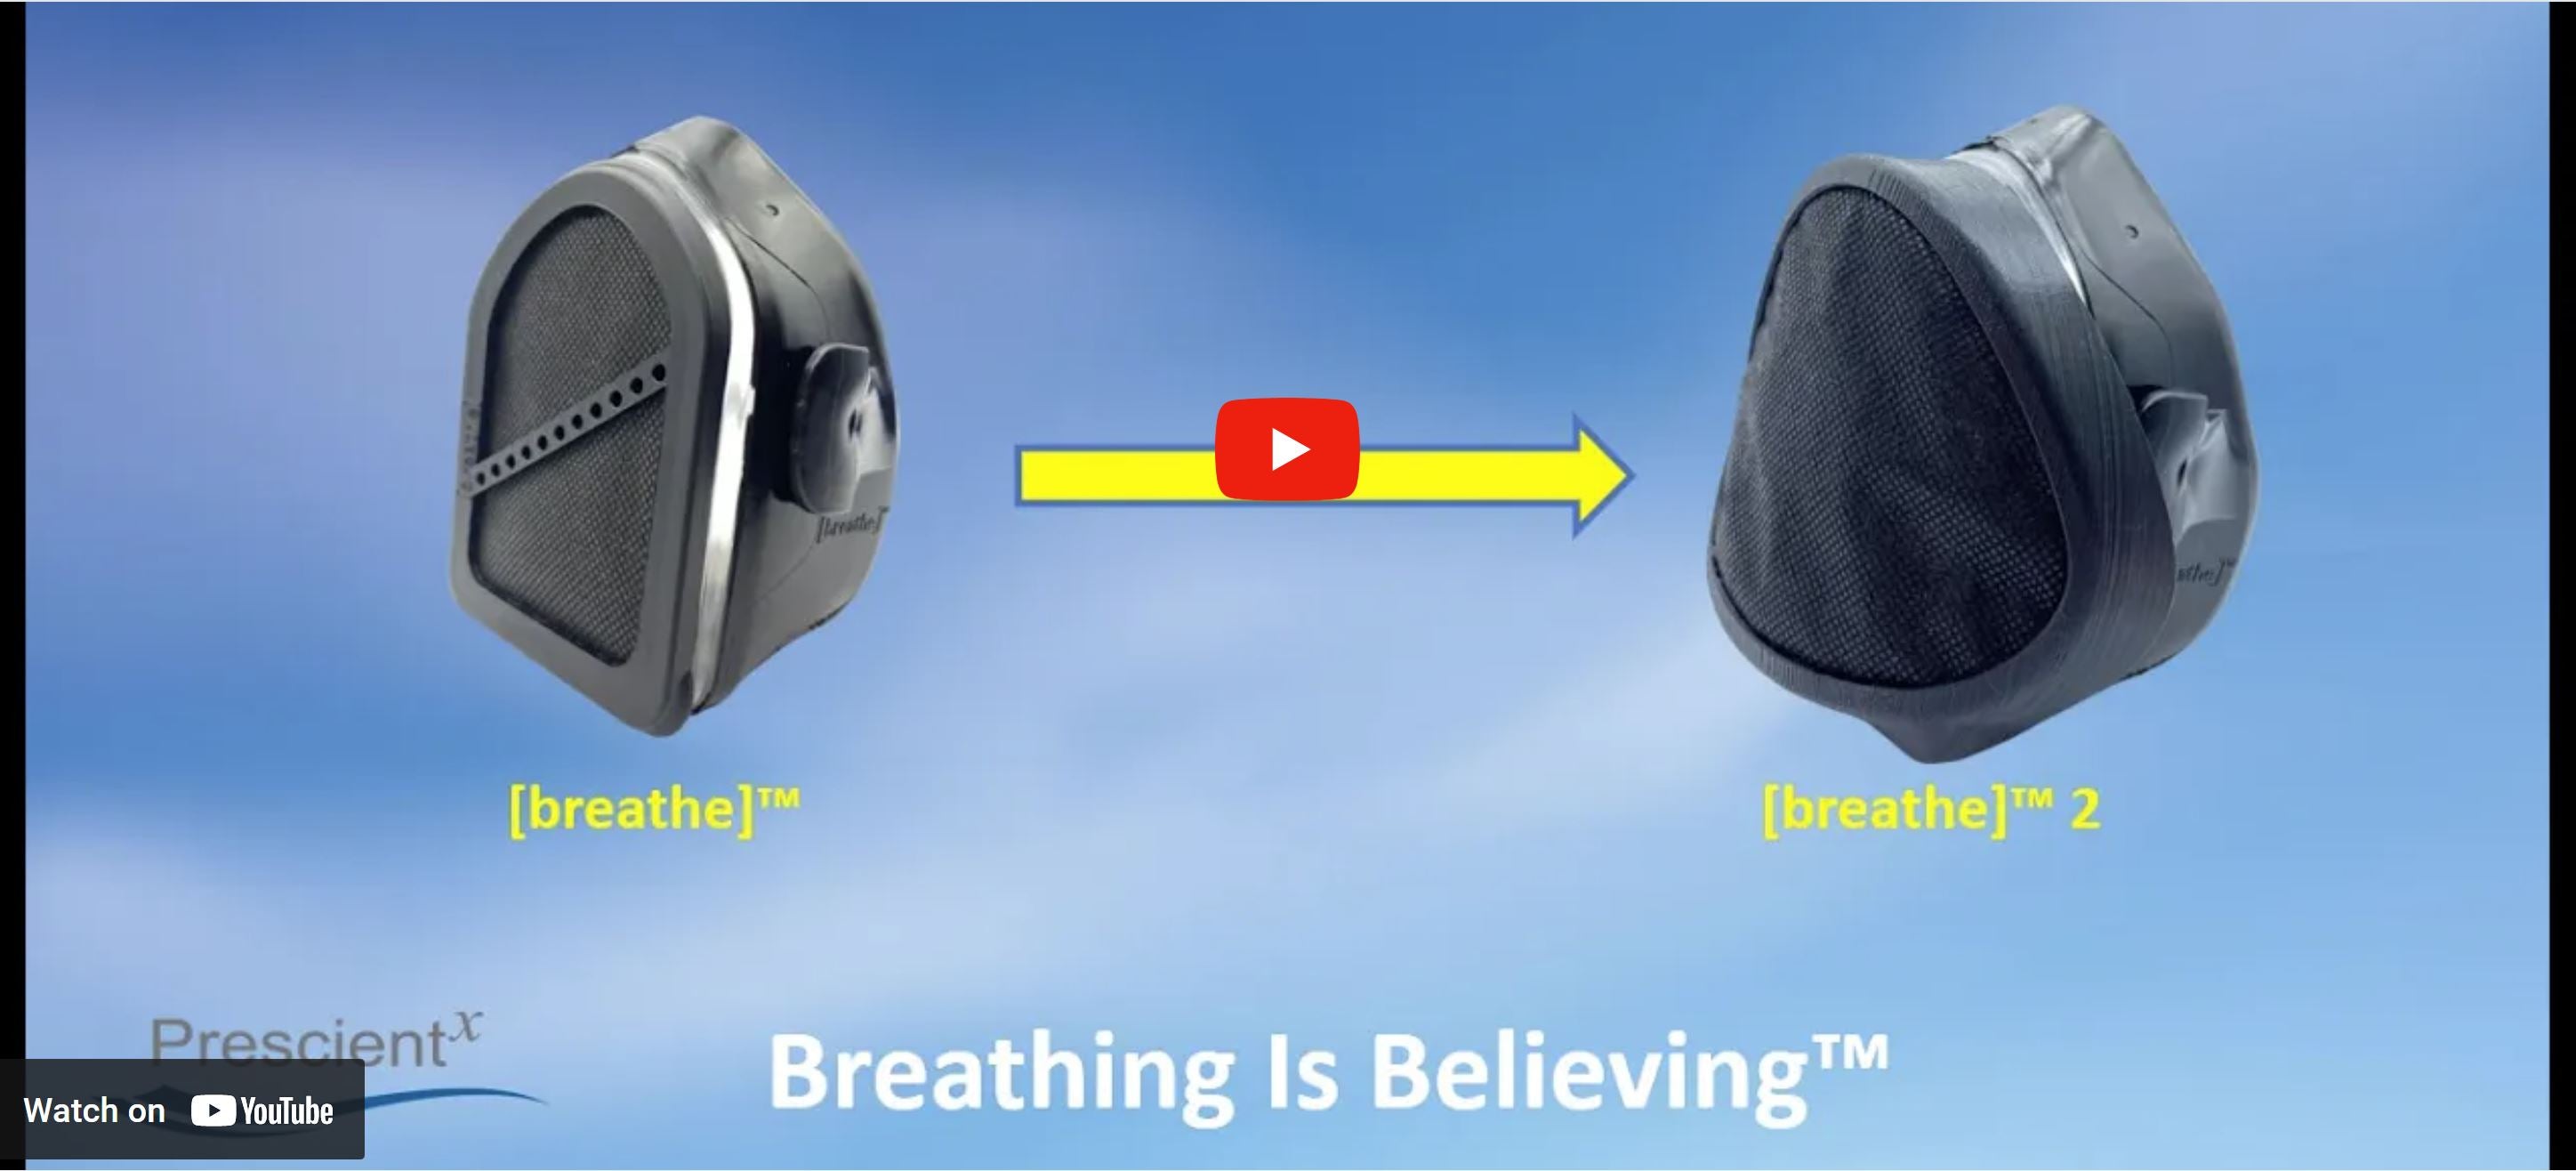 Load video: How to Convert a [breathe] Mask to a [breathe]™ 2 Mask